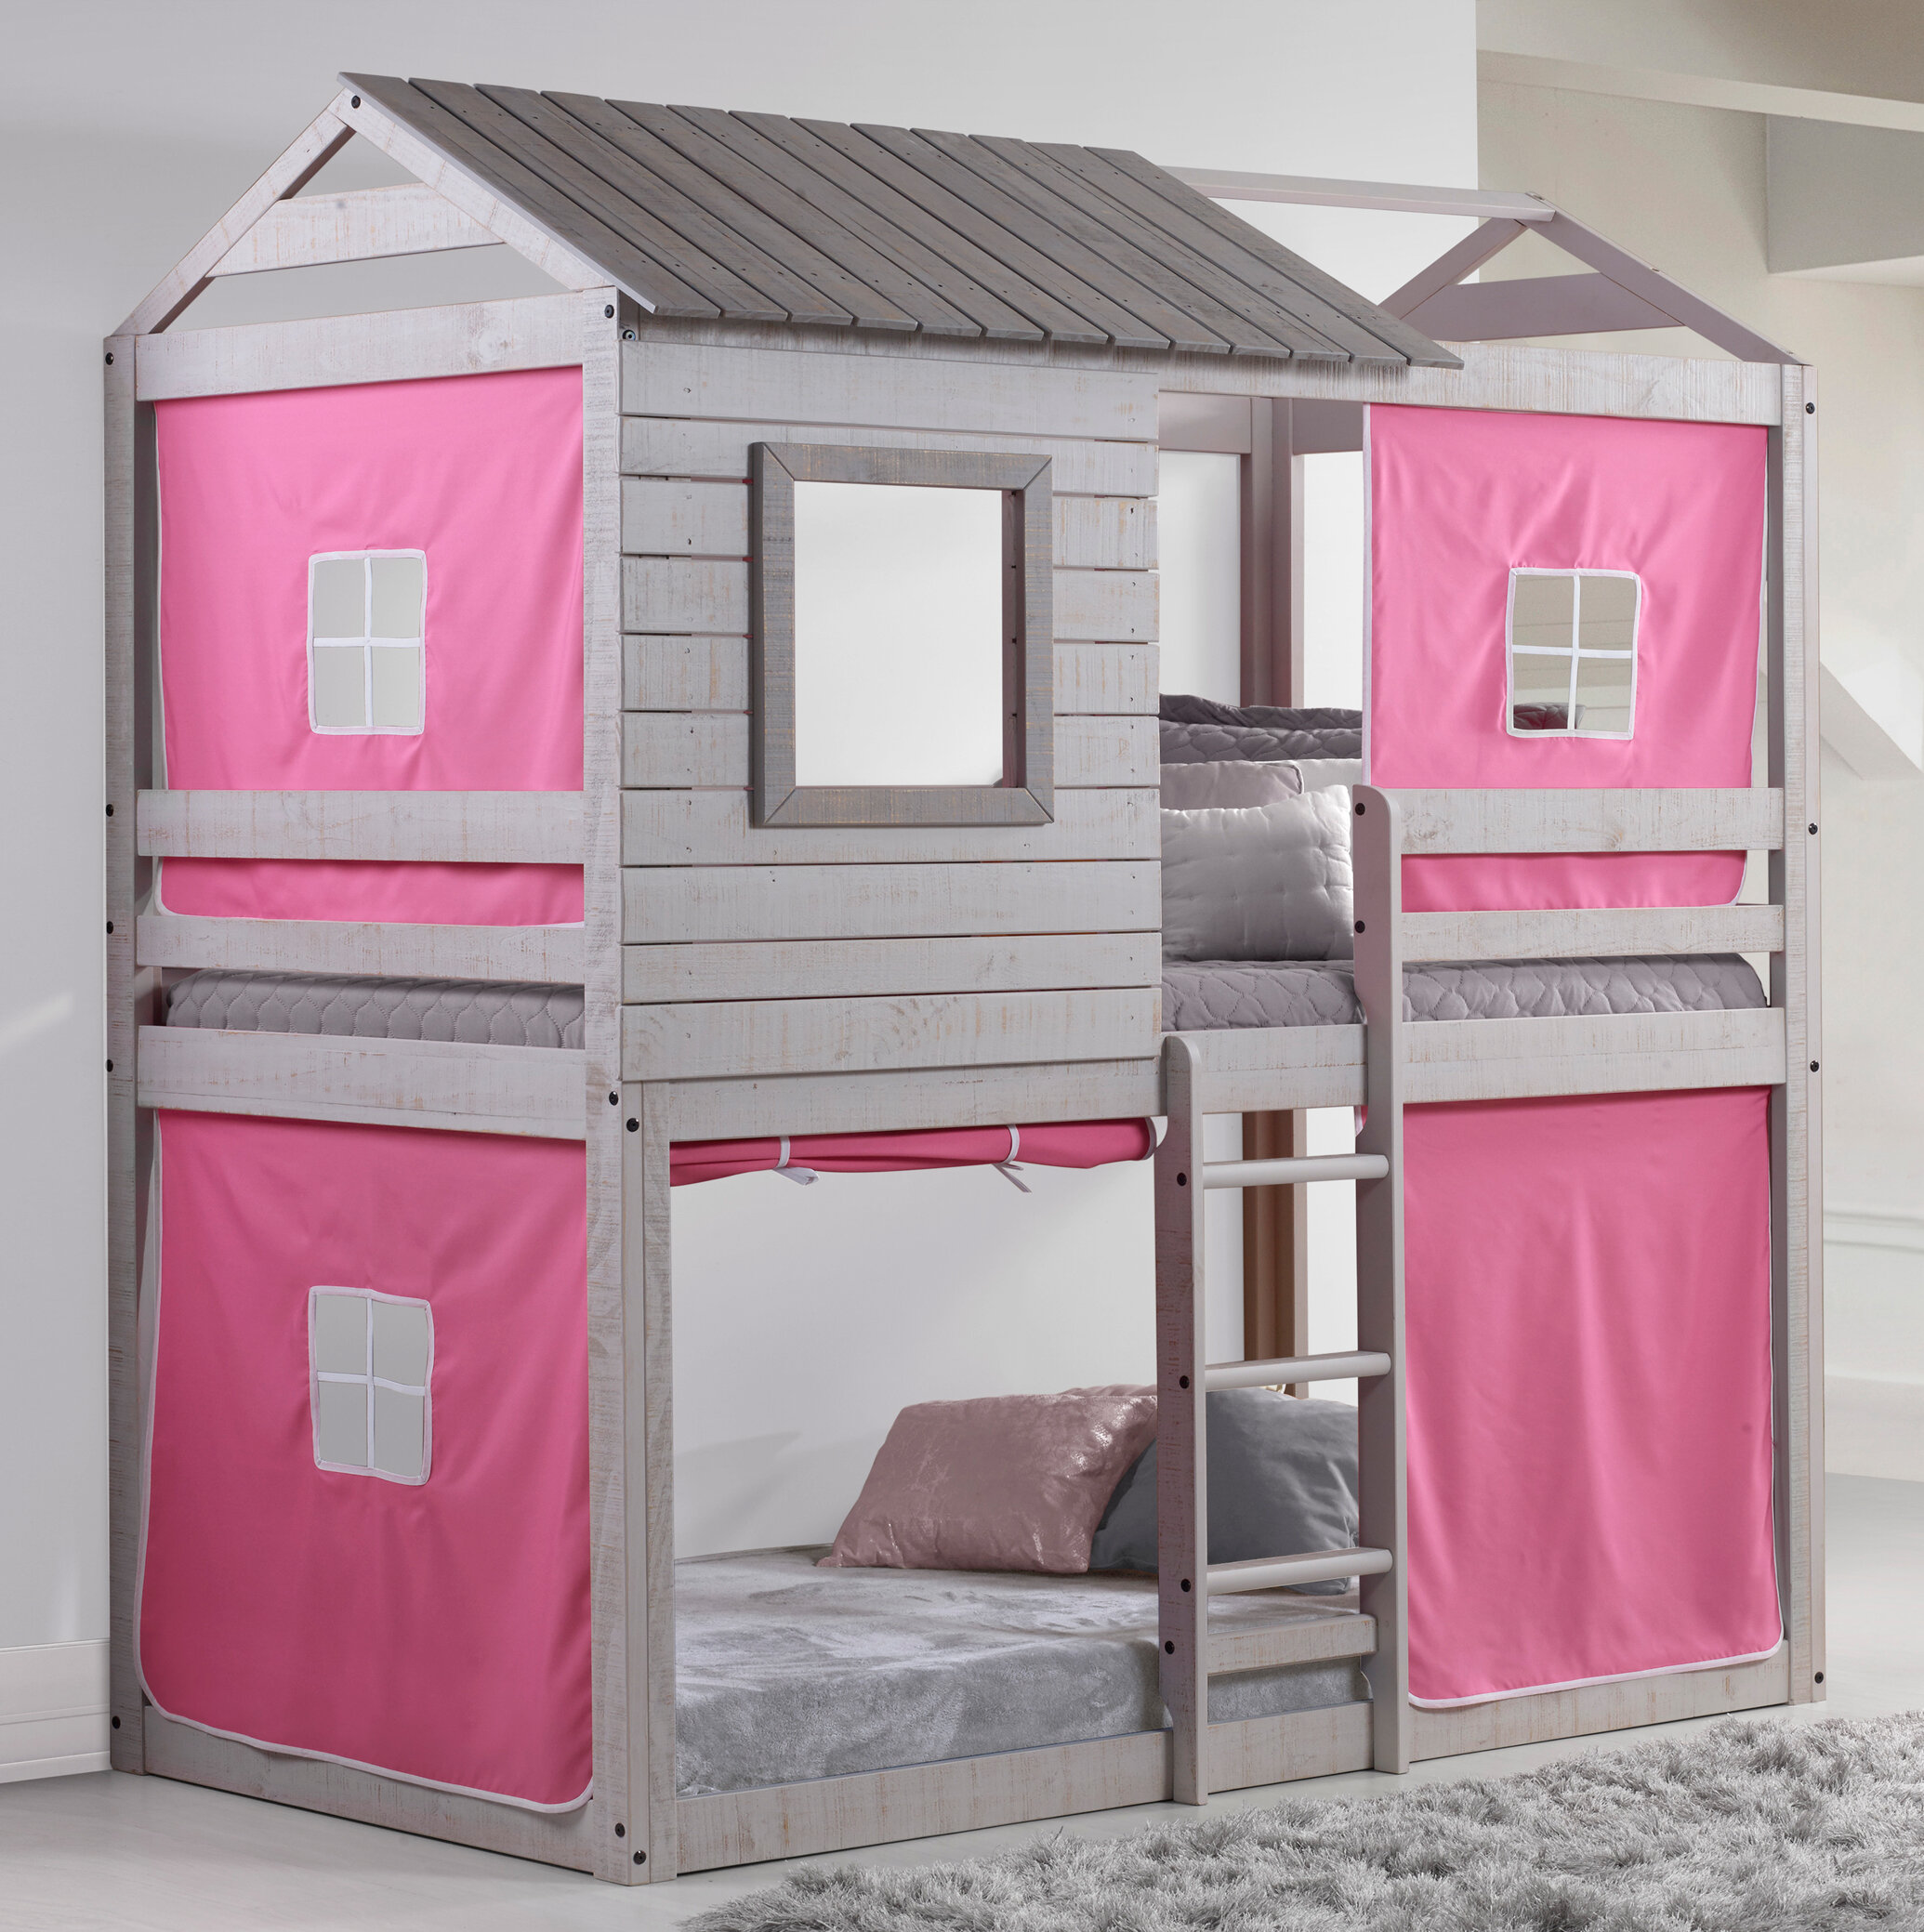 pink bunk beds for girls